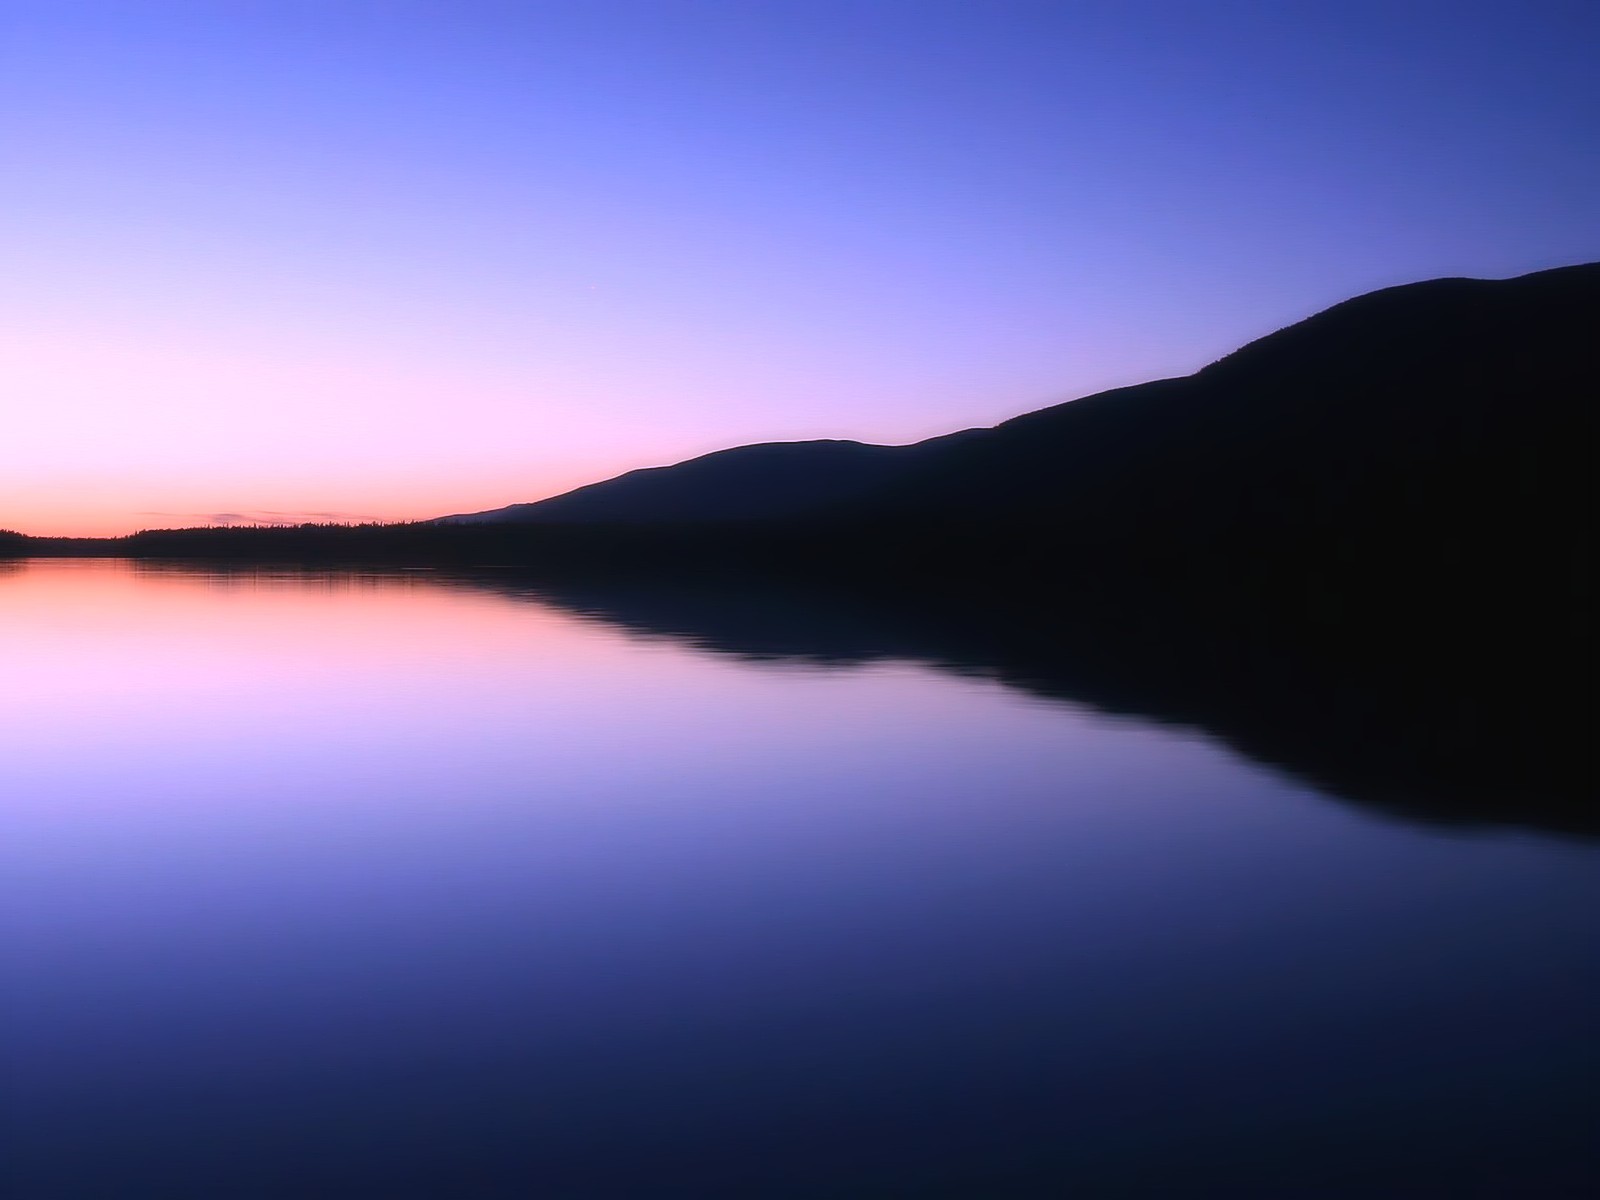 General 1600x1200 landscape sunset dusk hills silhouette skyscape nature water calm waters dark